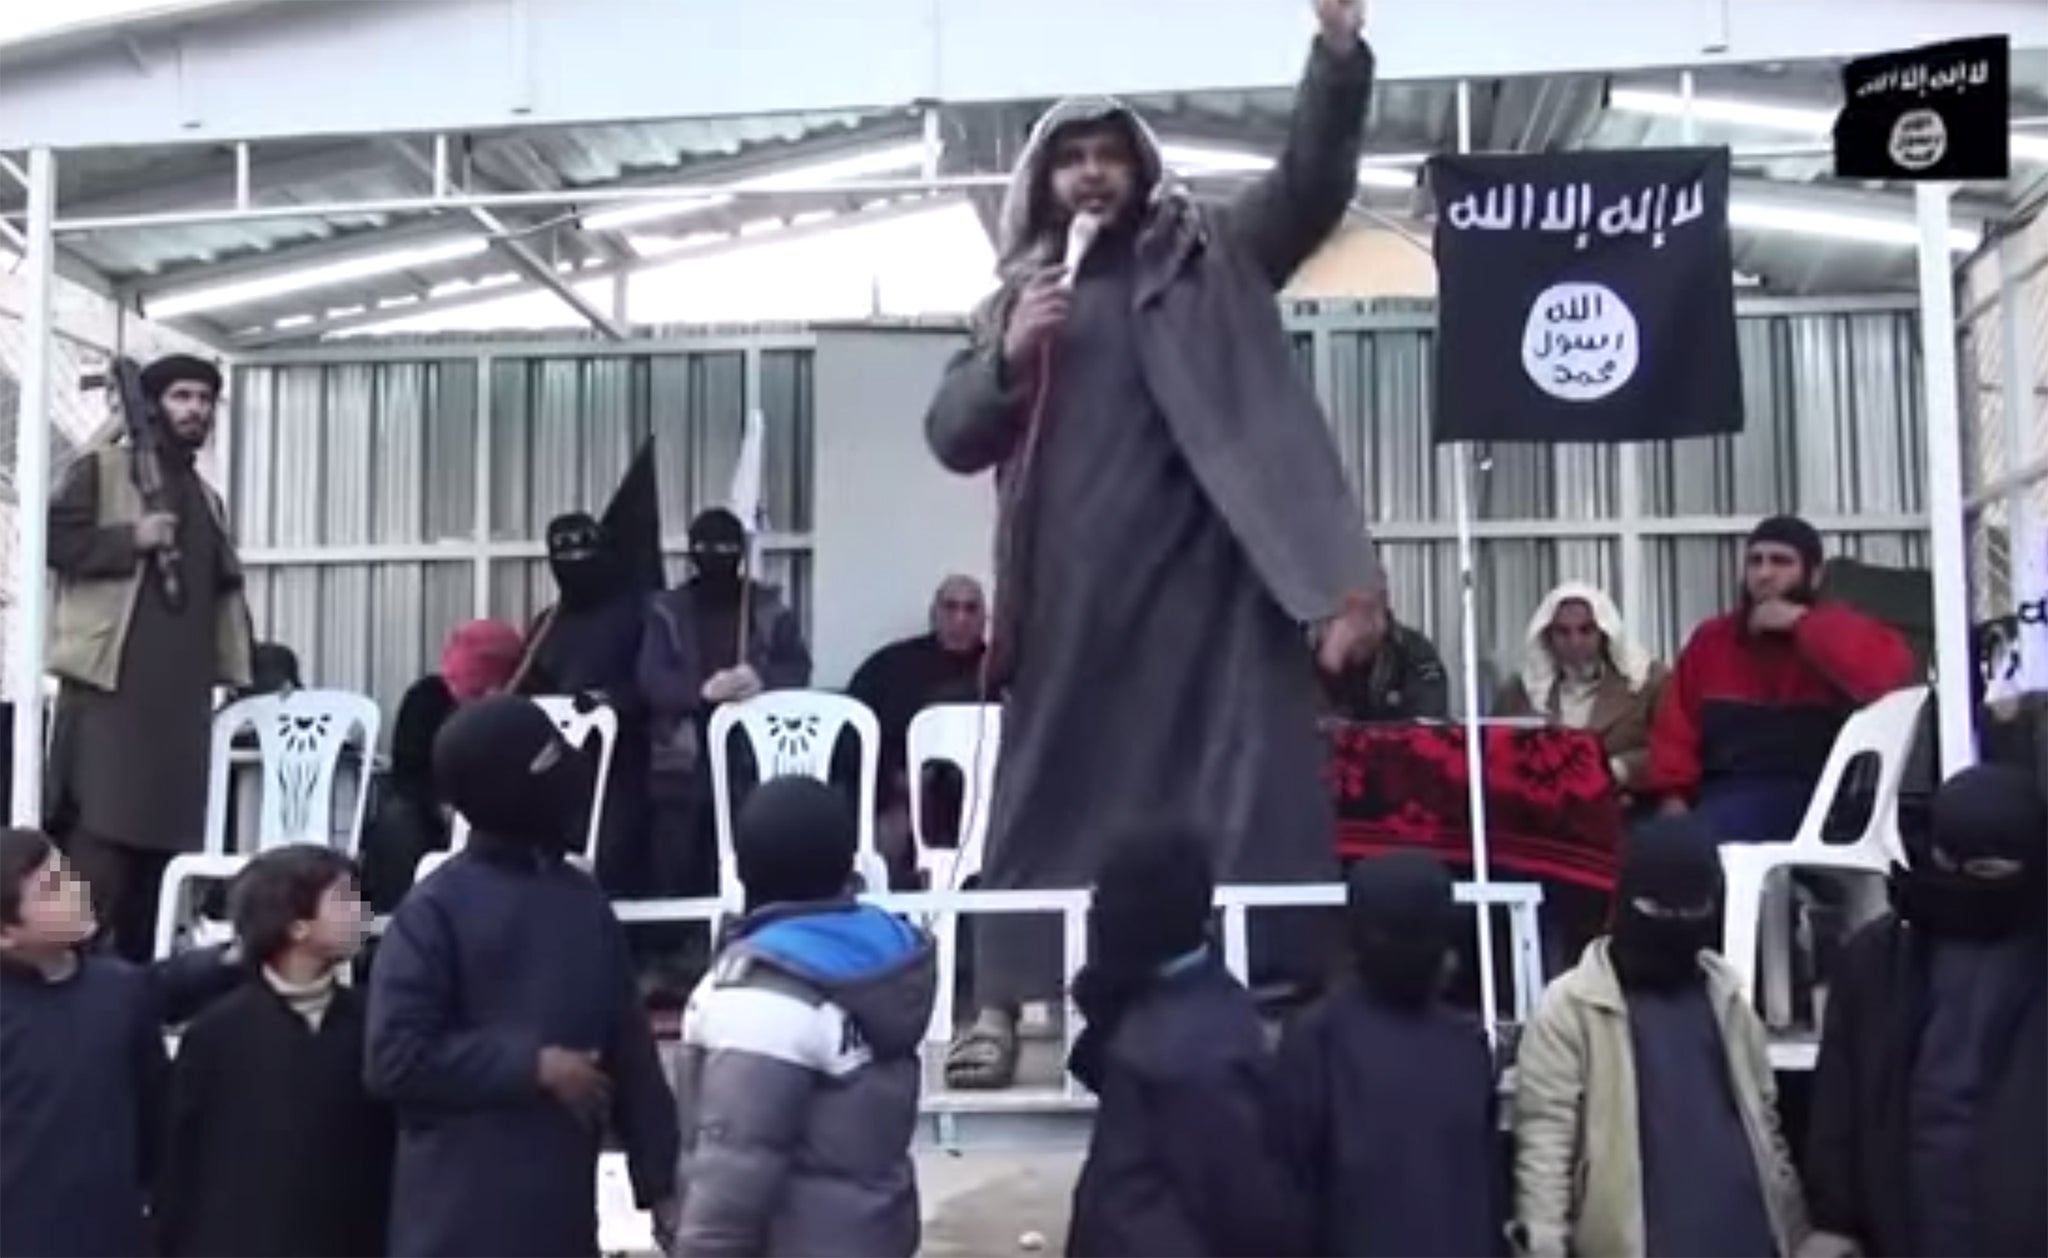 Armed men watch on as children who are thought to be 'graduating' from the Isis school stand in the foreground